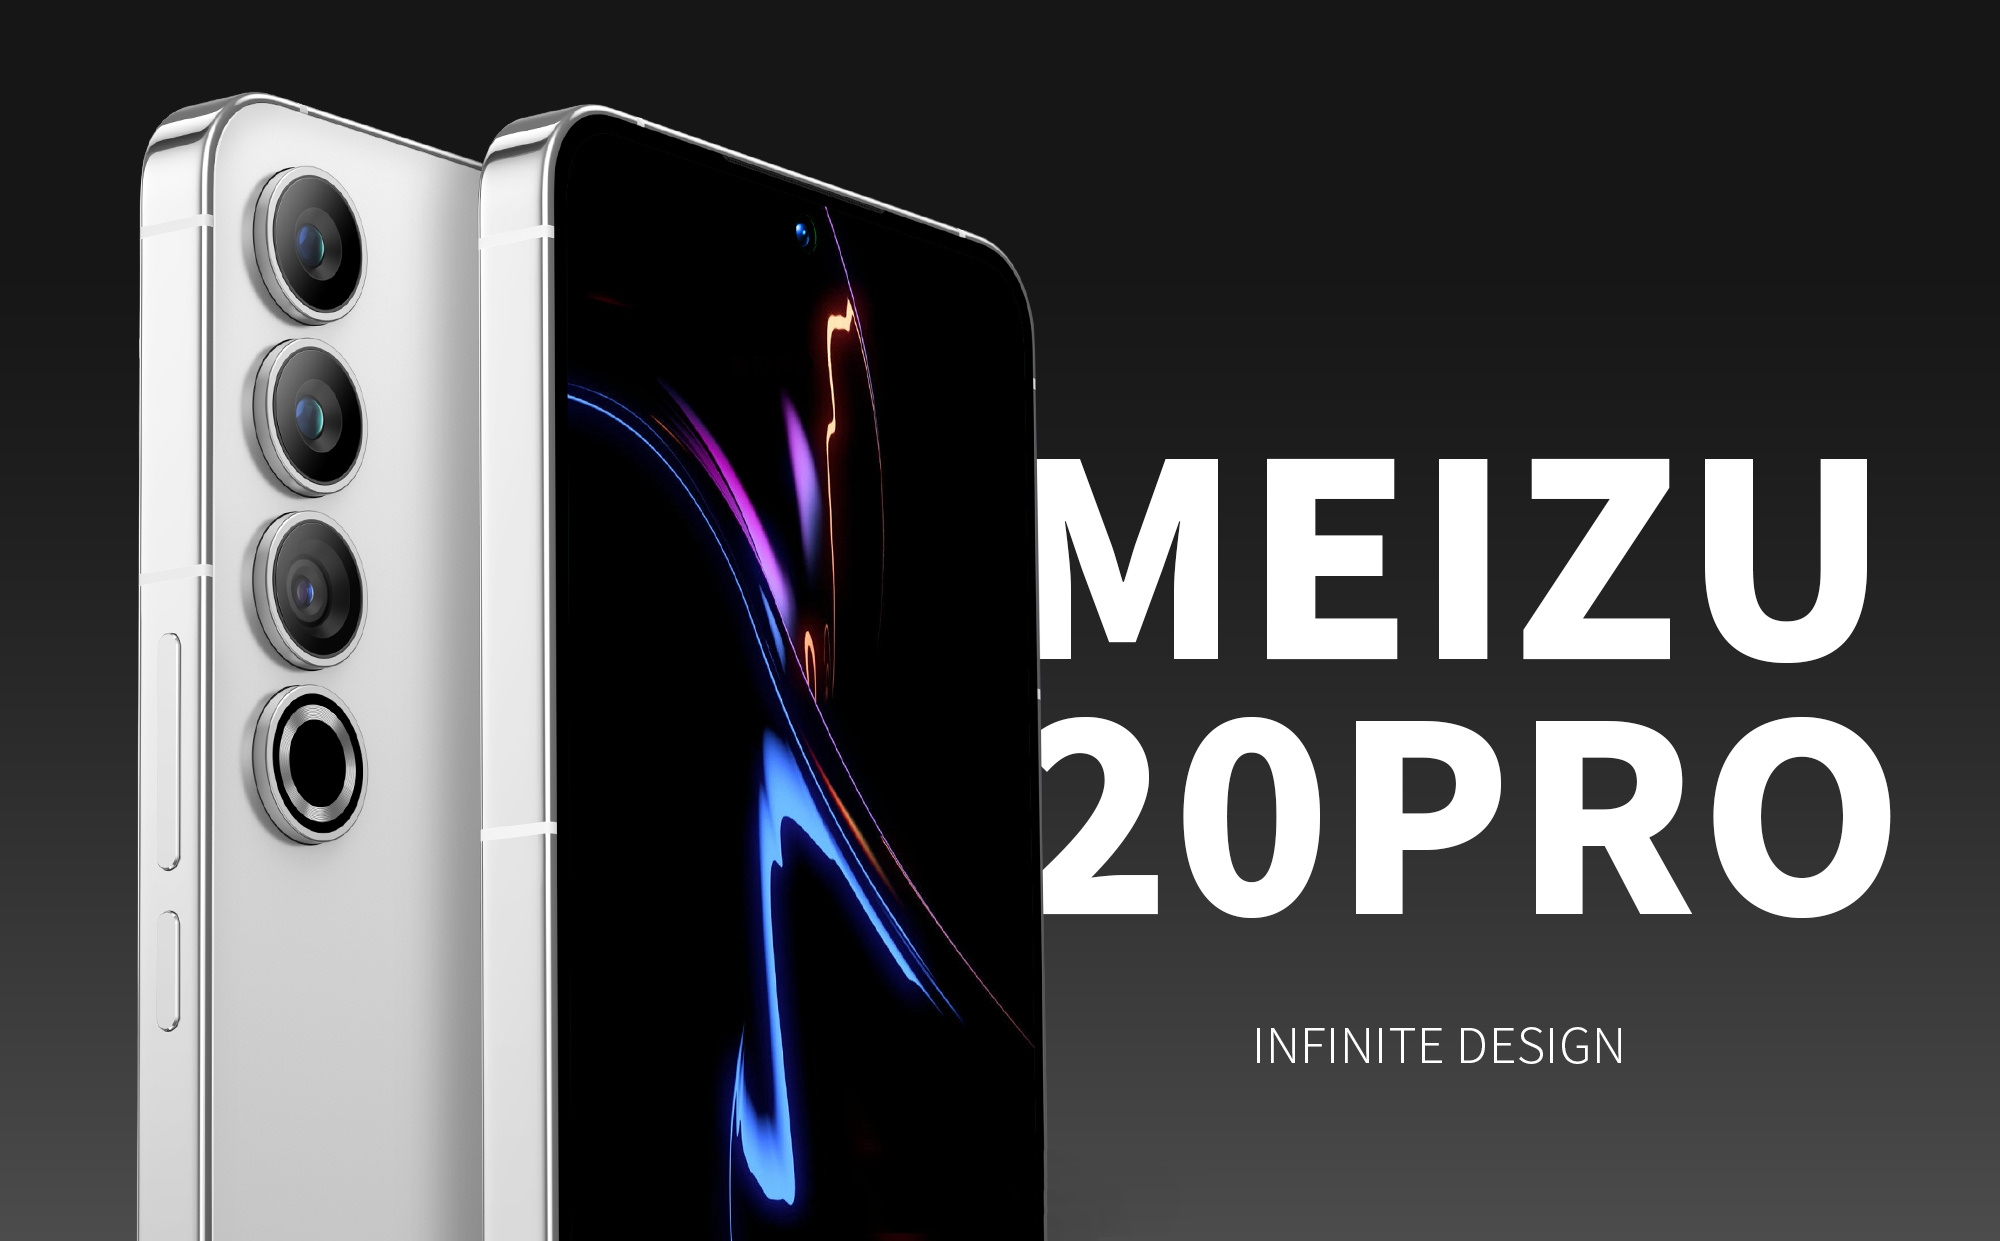 Insider reveals official Meizu 20 Pro image and when it will be unveiled